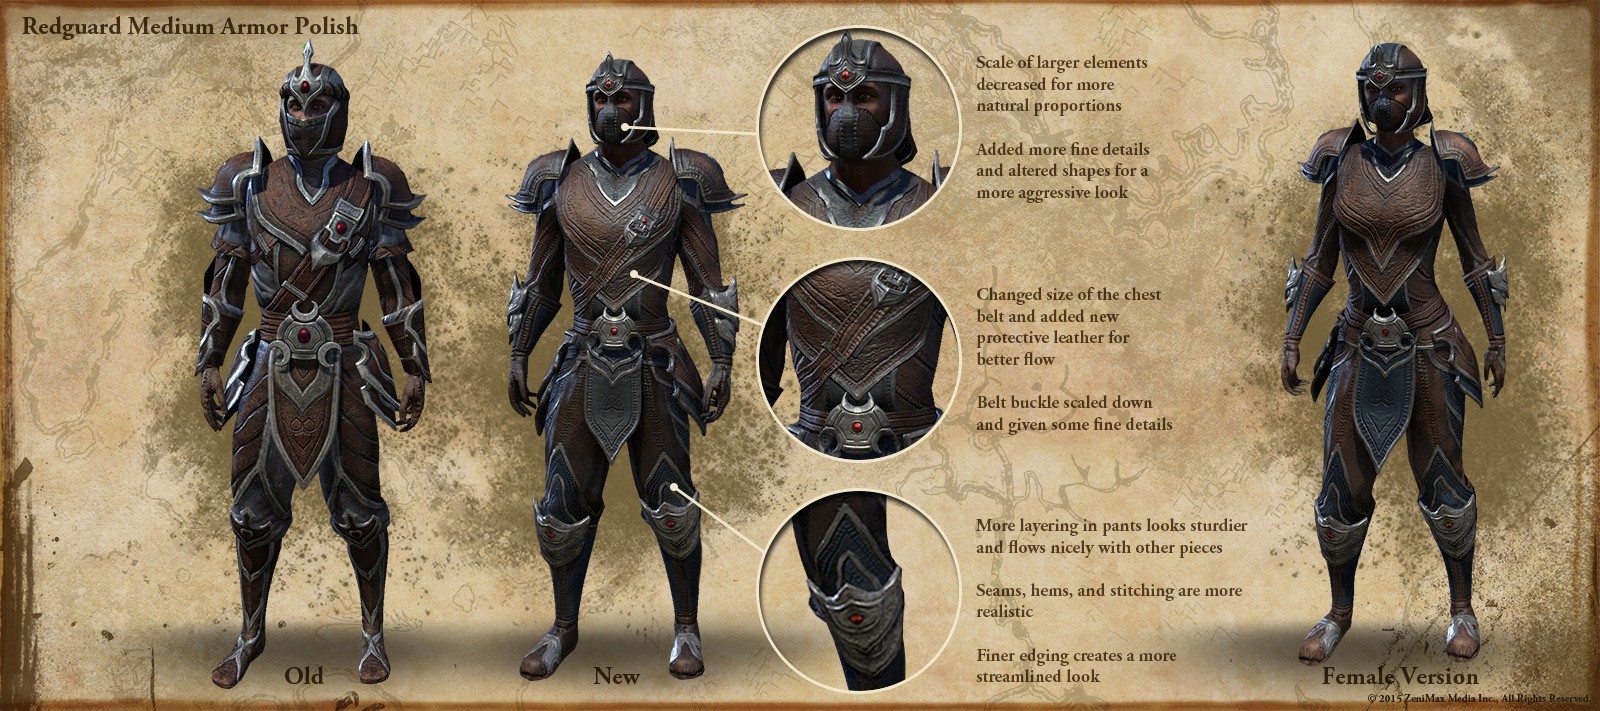 The-Elder-Scrolls-Online-Reveals-New-Orc-and-Redguard-Armor-for-Update-6-472669-6.jpg